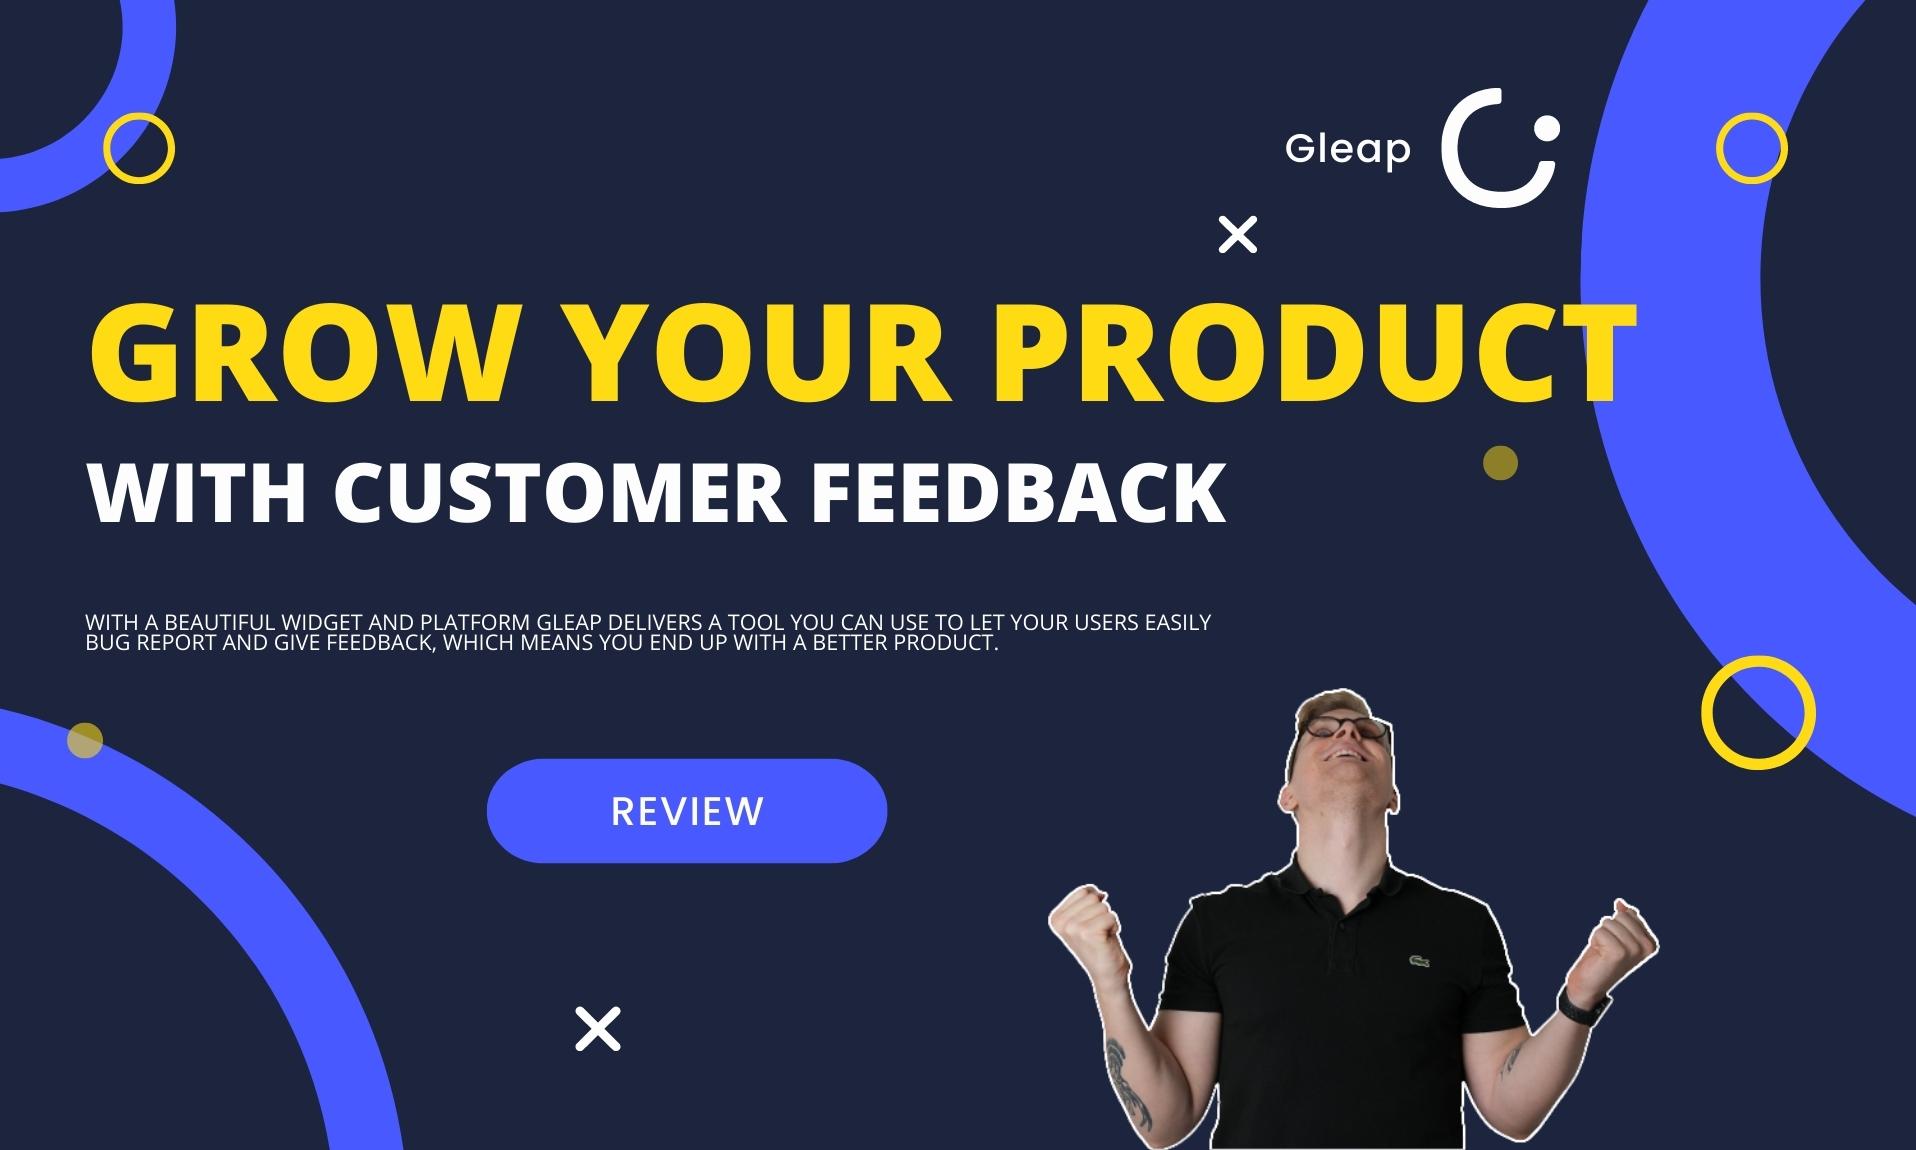 Gleap review - Bug reporting made easy